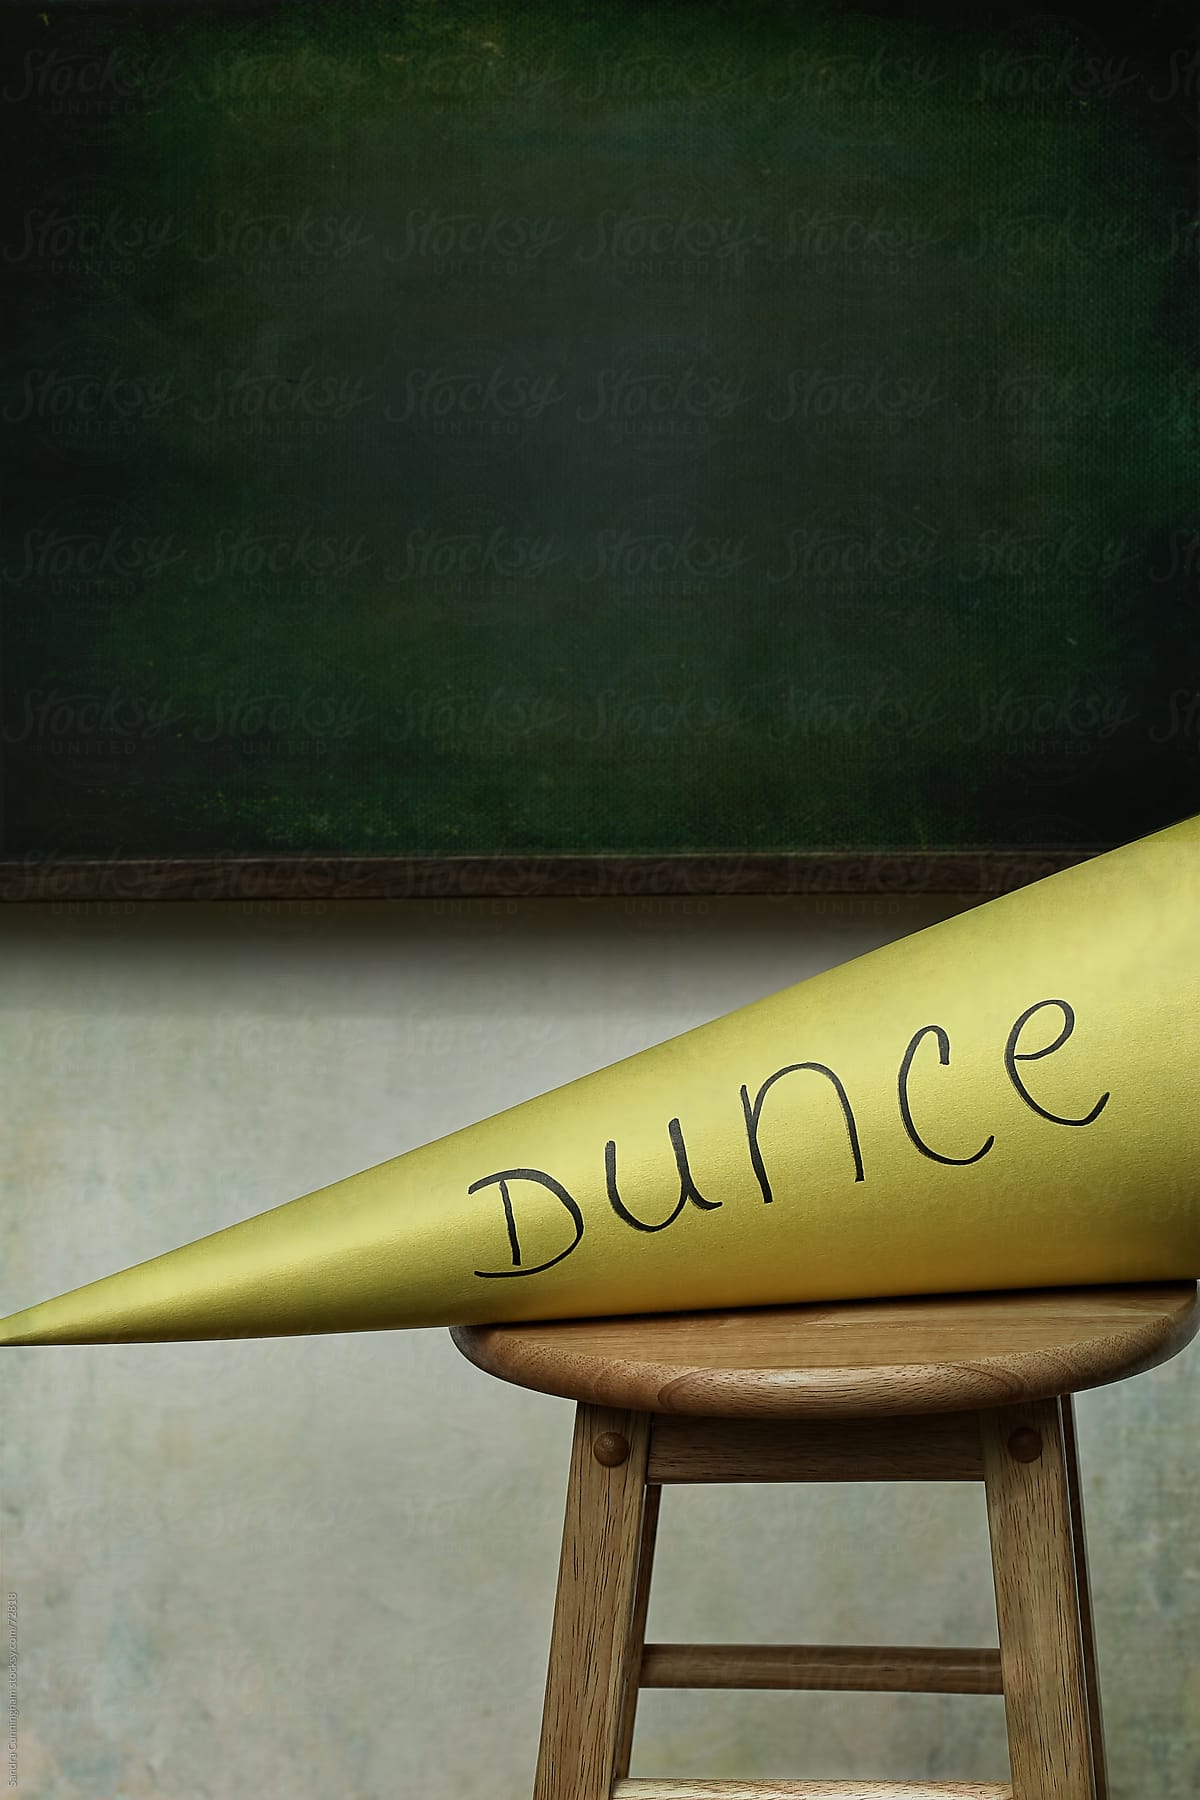 Closeup dunce hat on stool with chalkboard in background